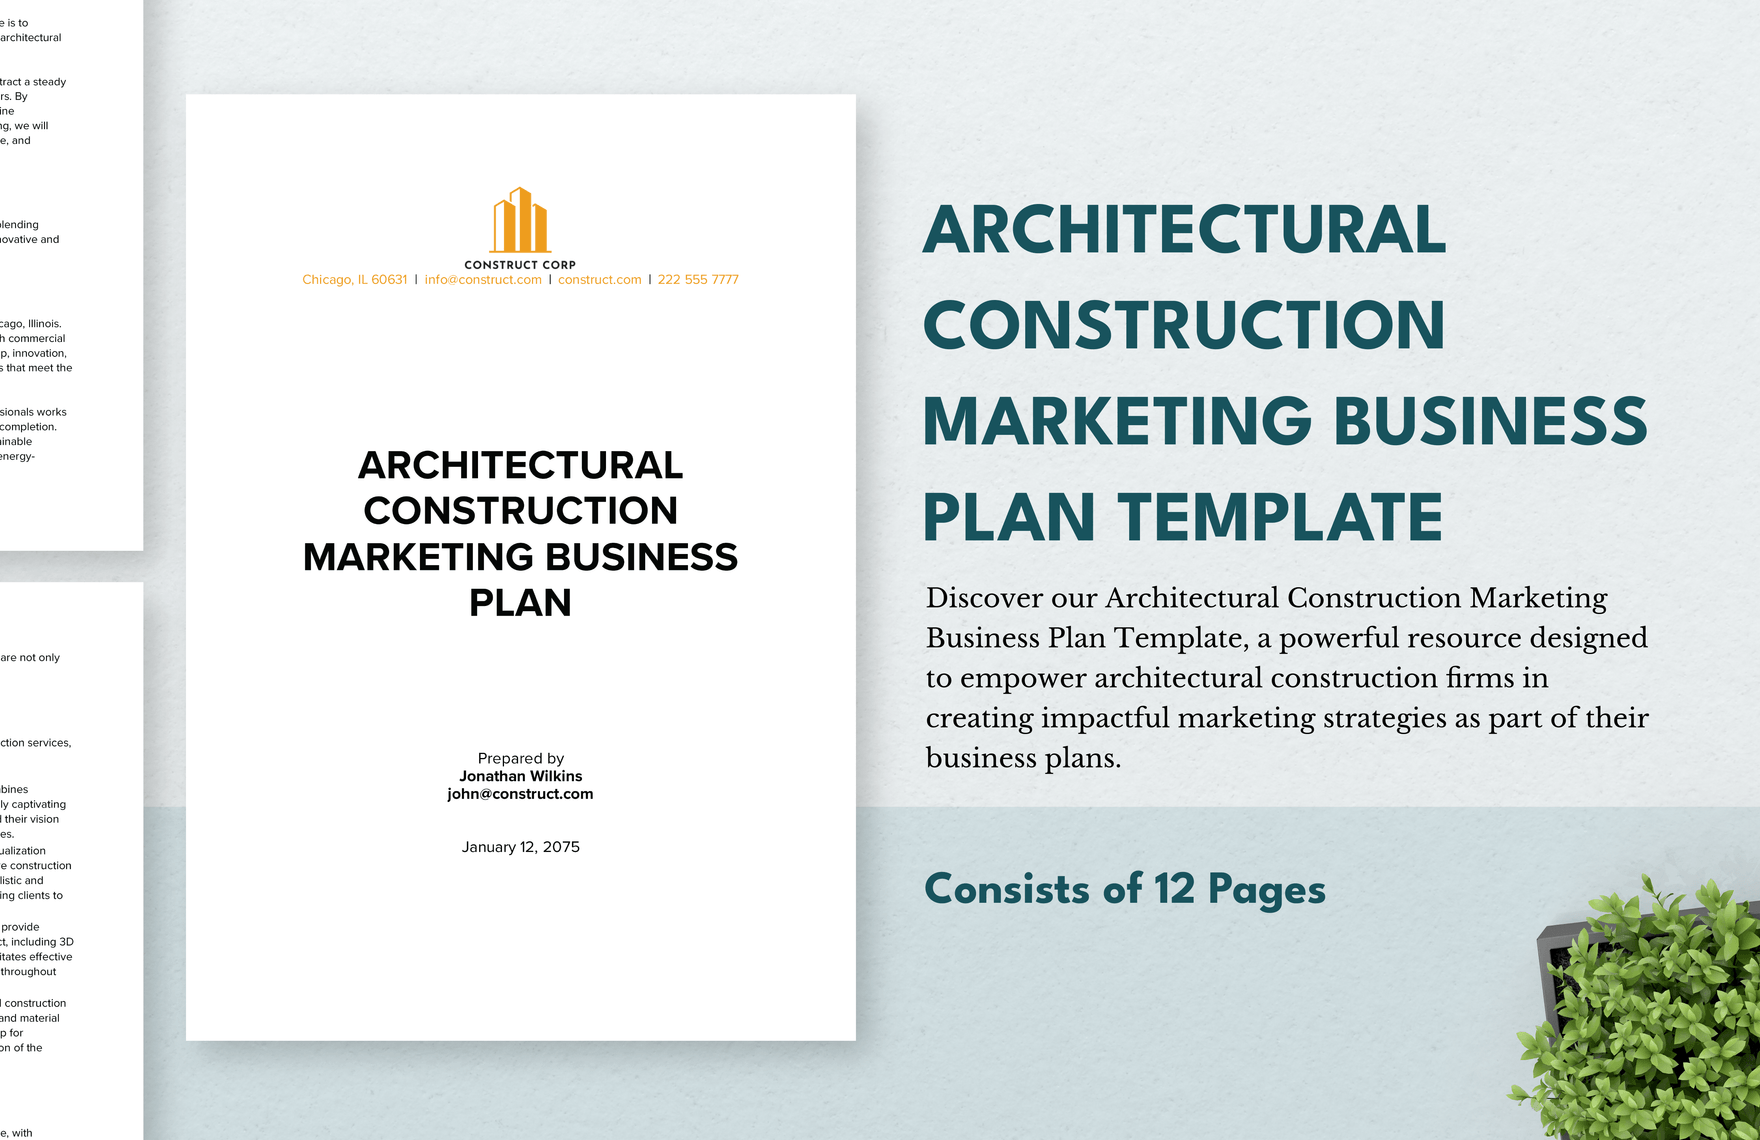 Architectural Construction Marketing Business Plan Template